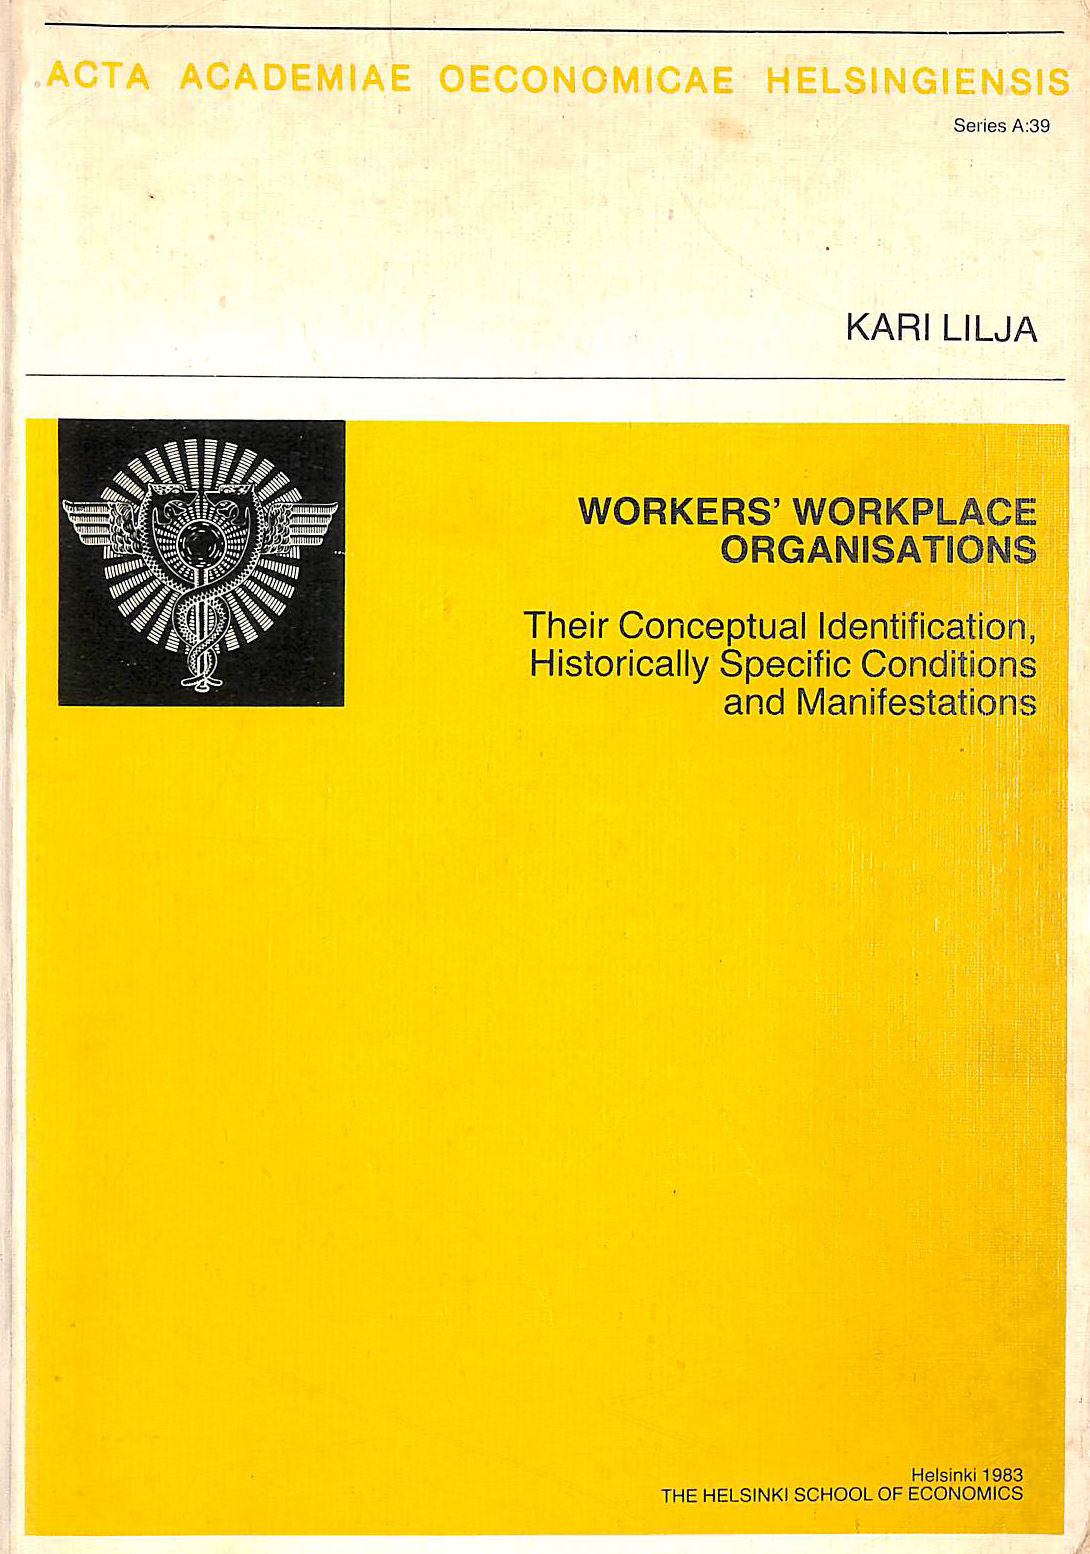 KARI LILJA - Workers workplace organisations: Their conceptual identification, historically specific conditions and manifestations (Acta Academiae Oeconomicae Helsingiensis. Ser.A)